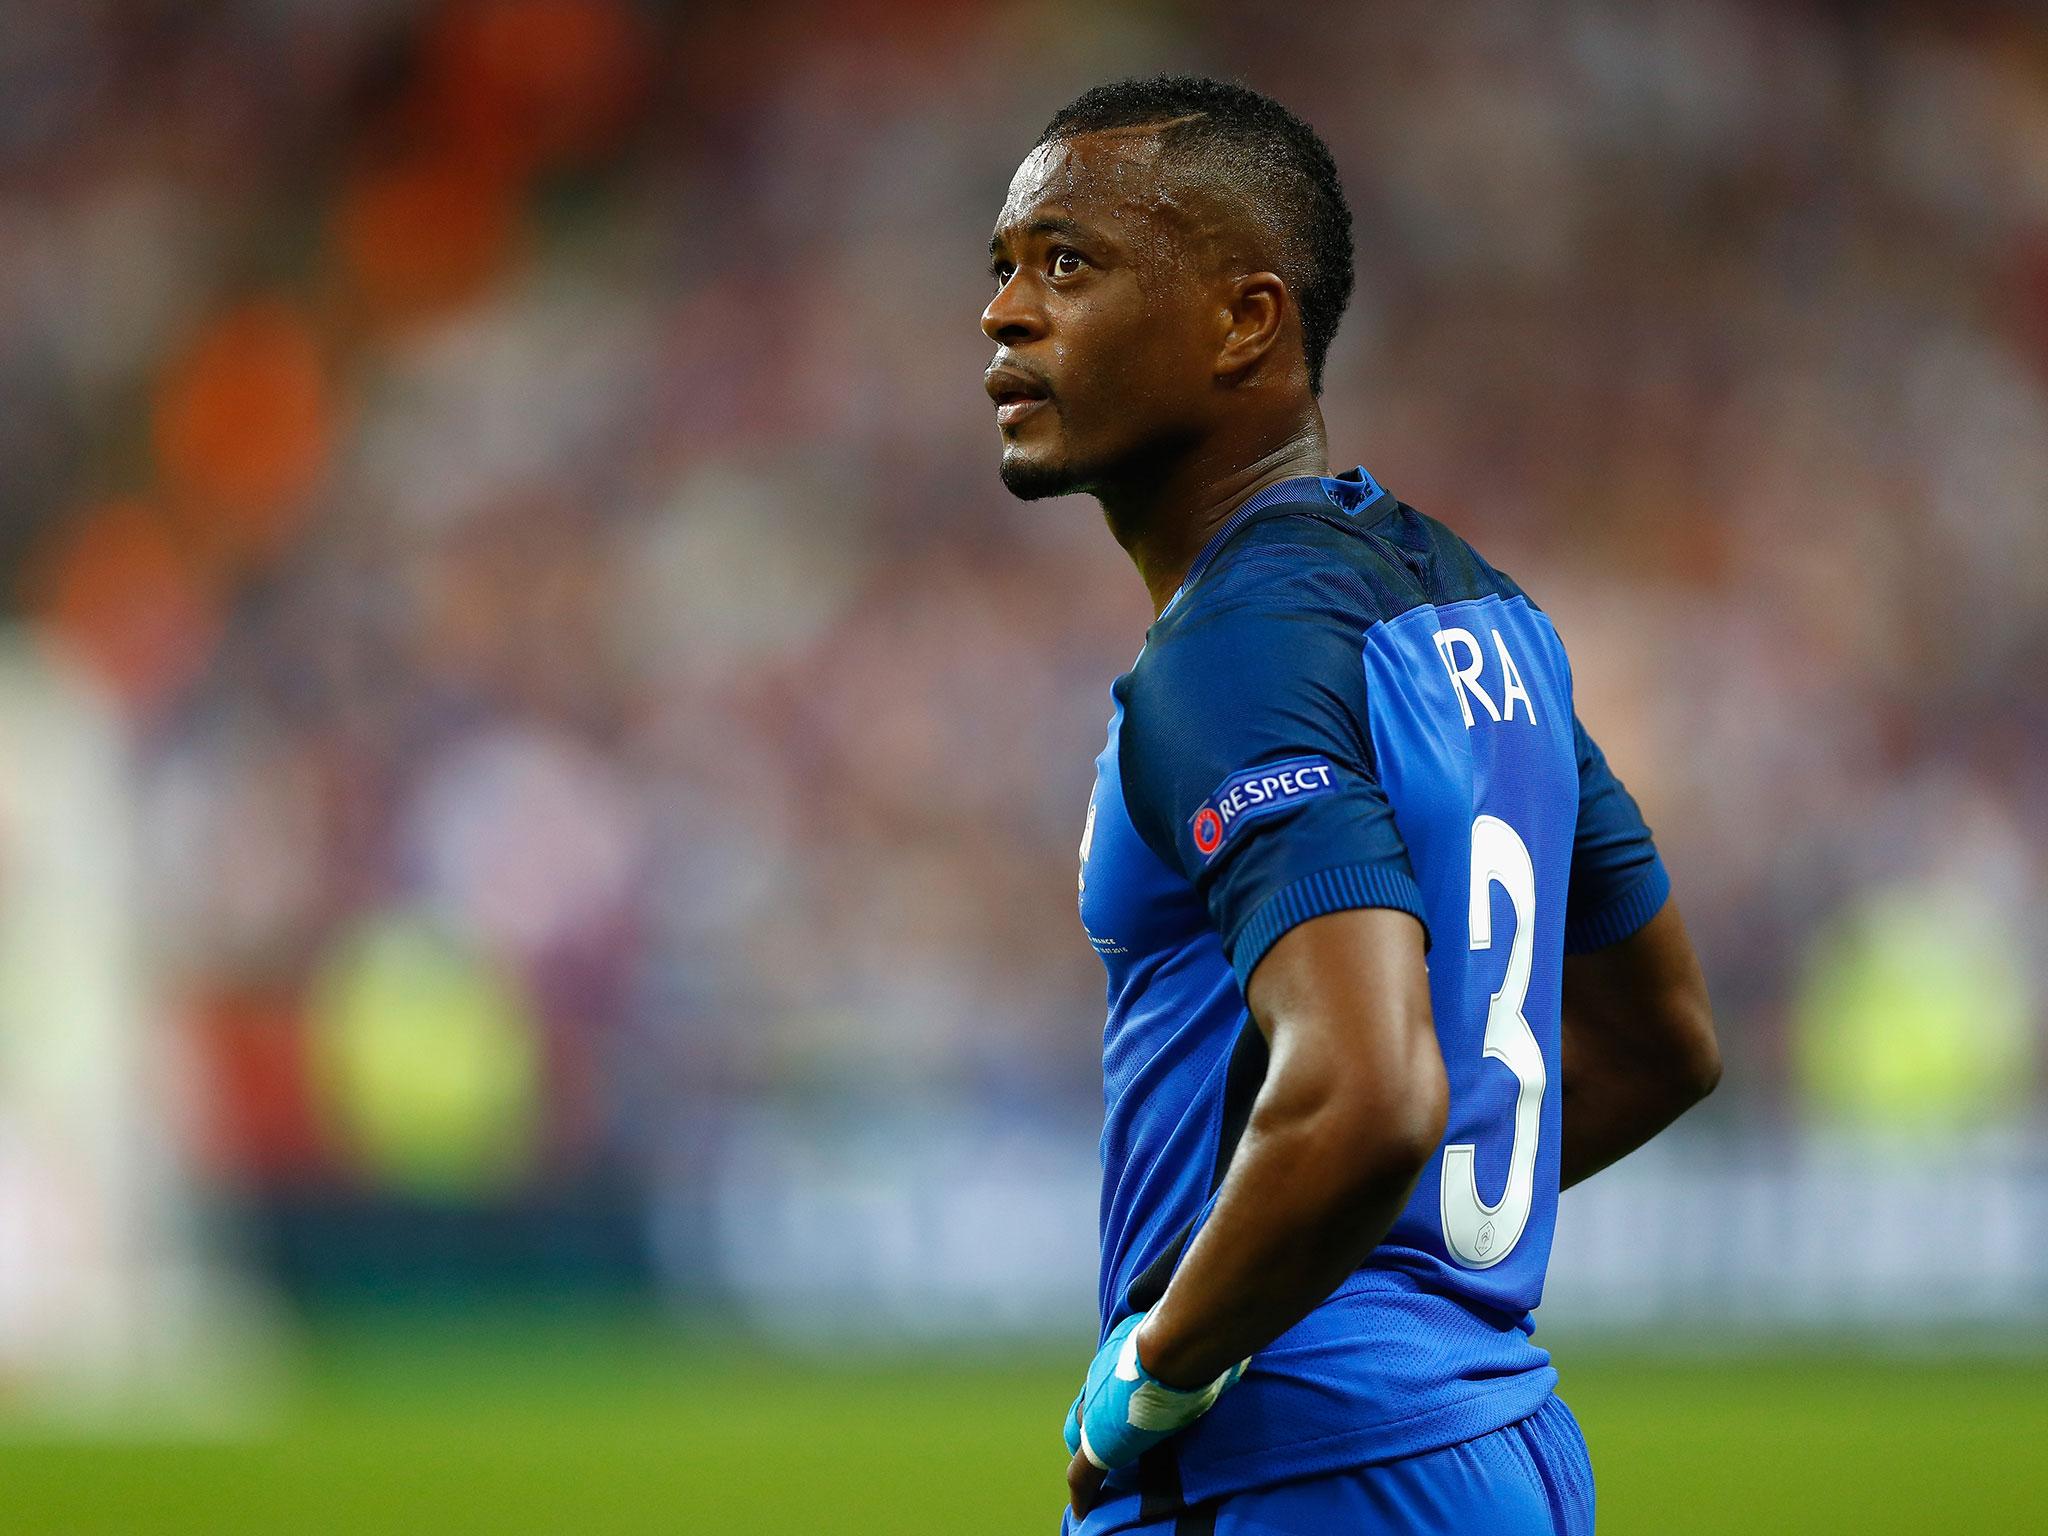 Evra could return as a member of Mourinho's coaching staff